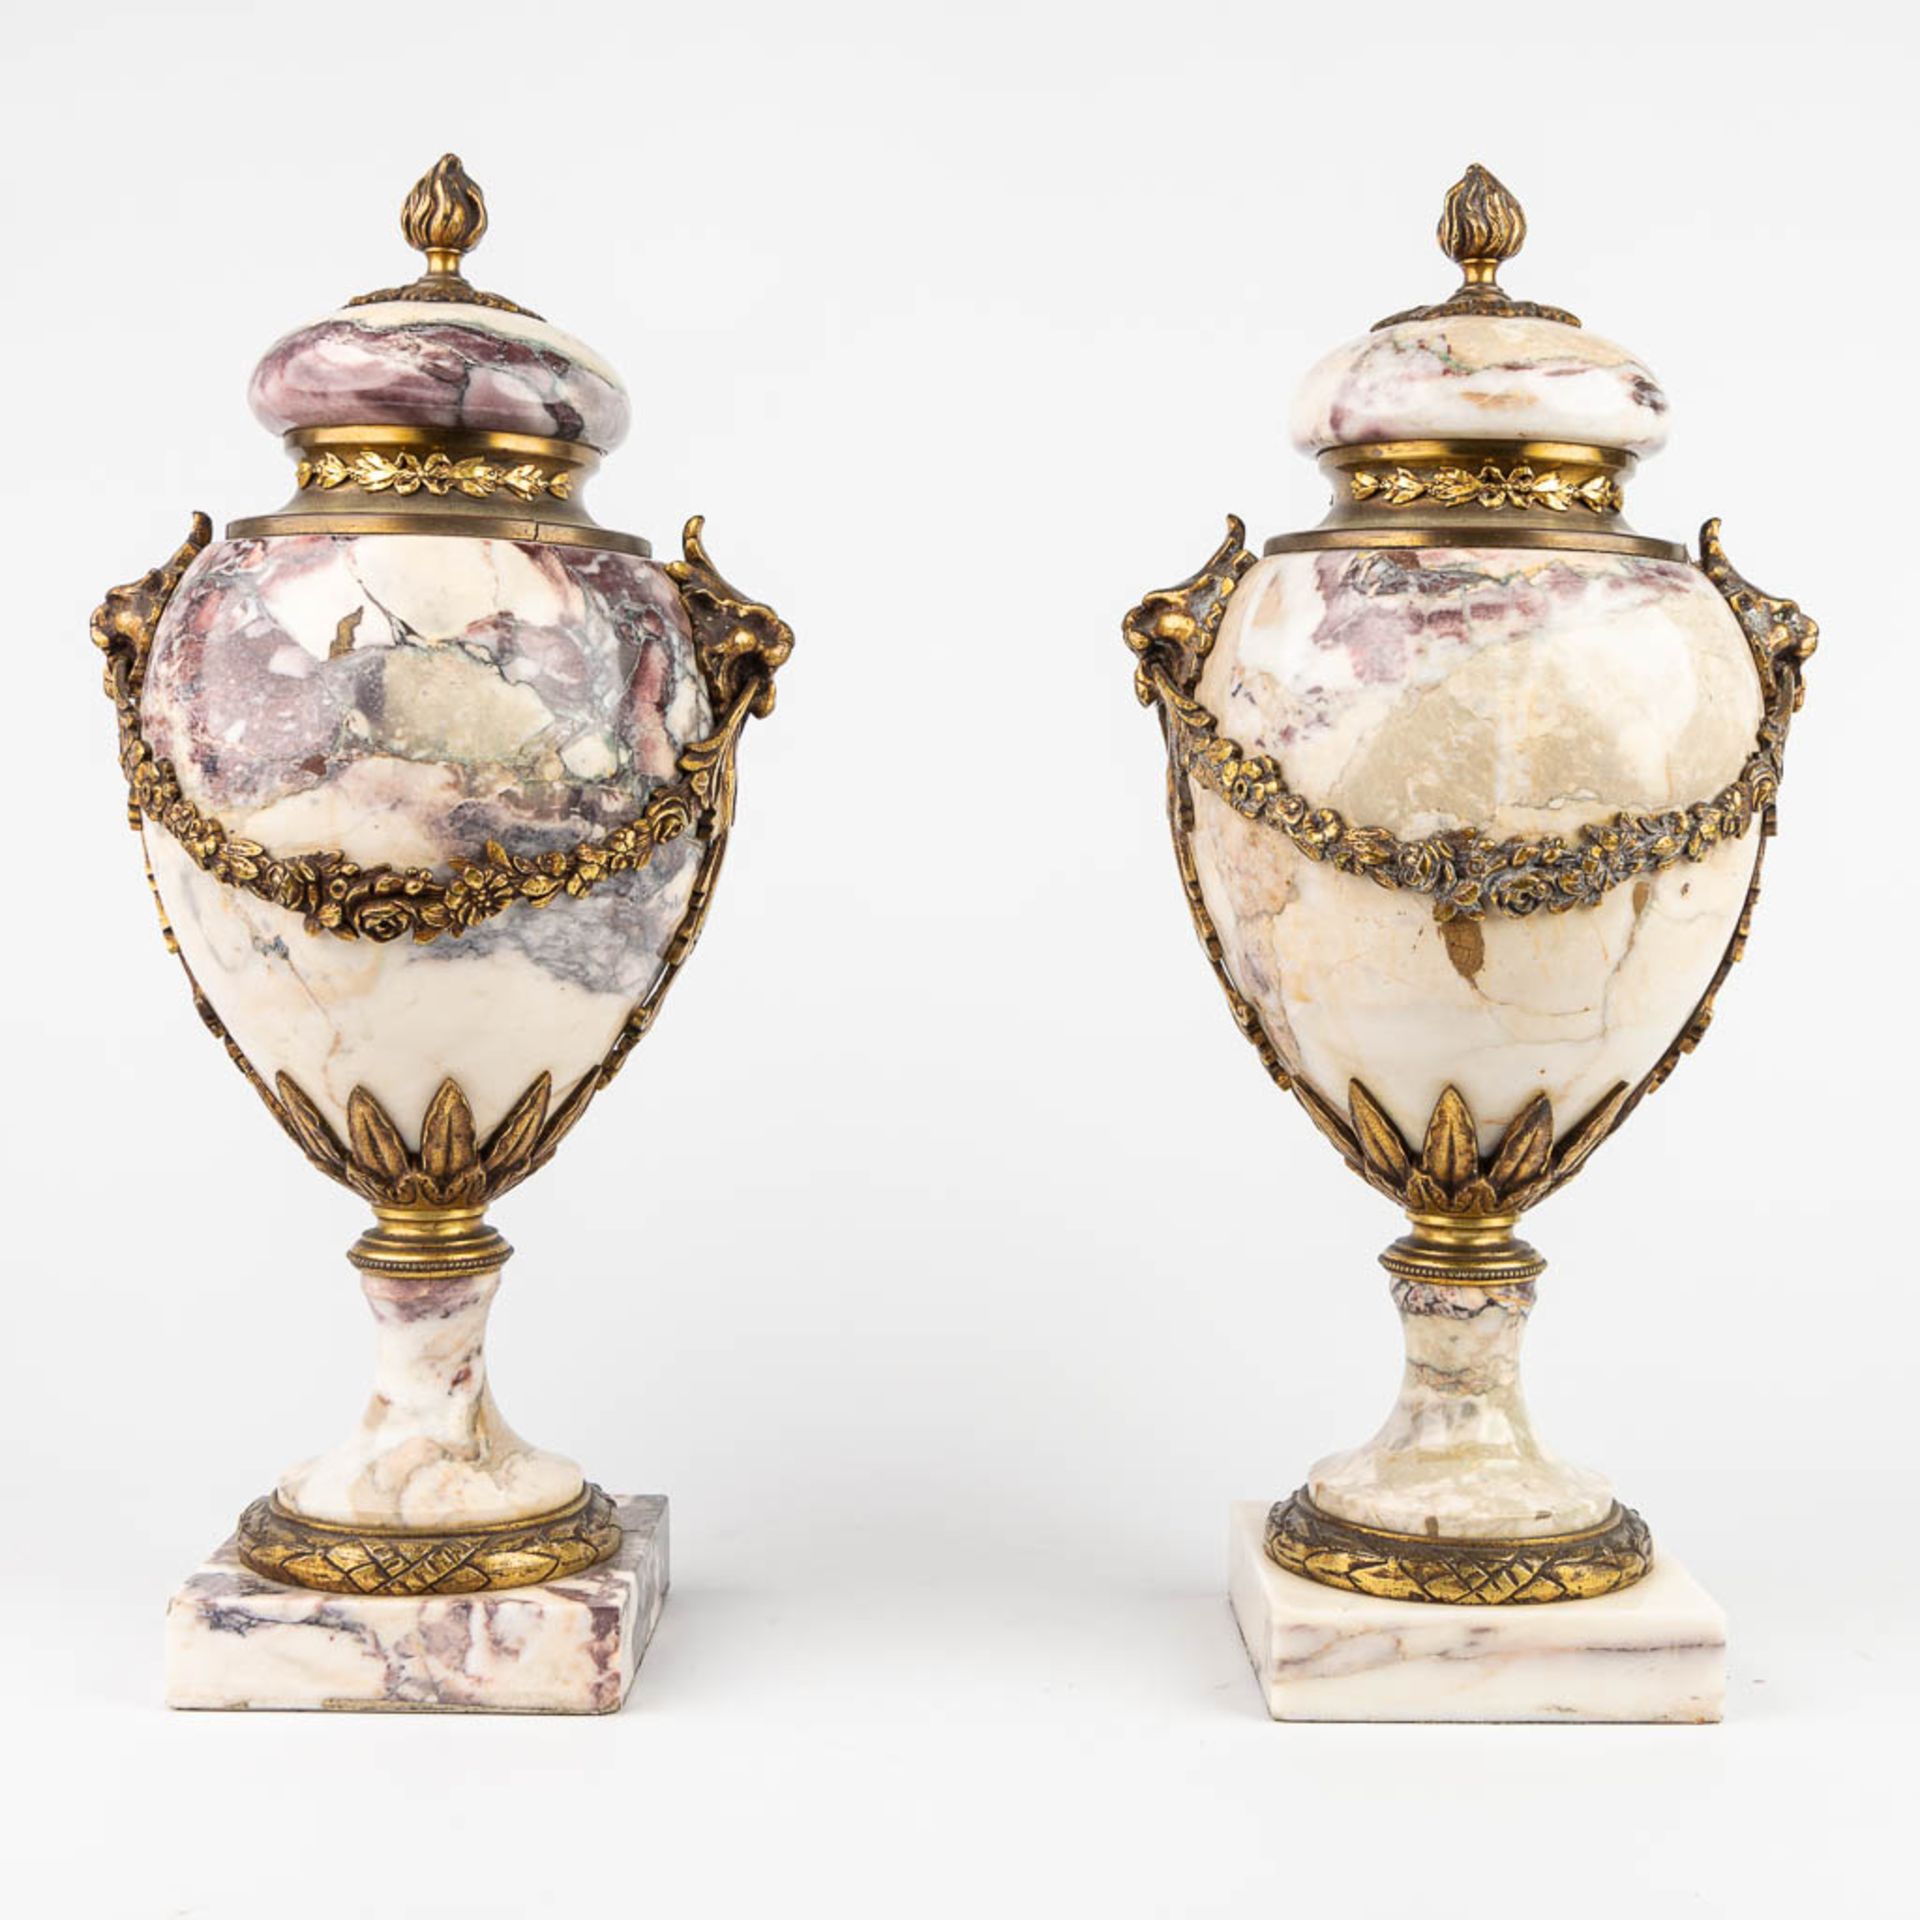 A pair of cassolettes made of marble and mounted with bronze. (H:40cm) - Image 8 of 15